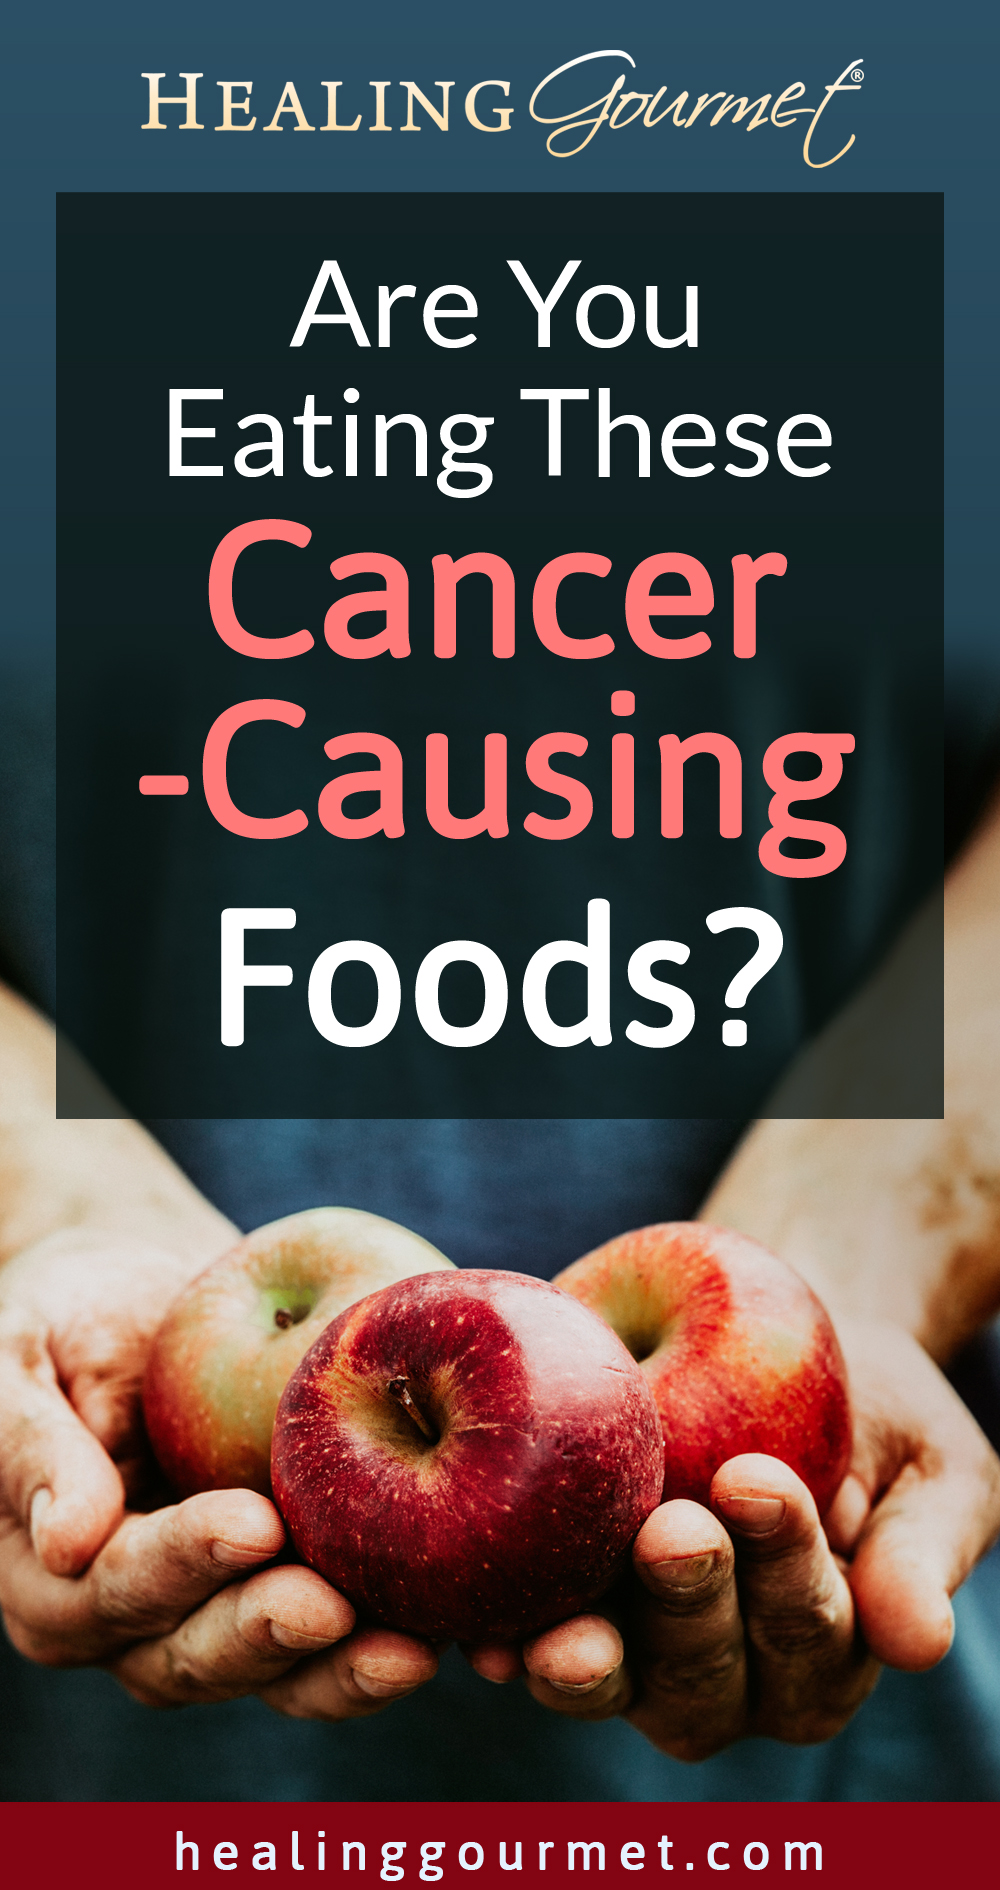 Are You Eating These Cancer-Causing Foods?